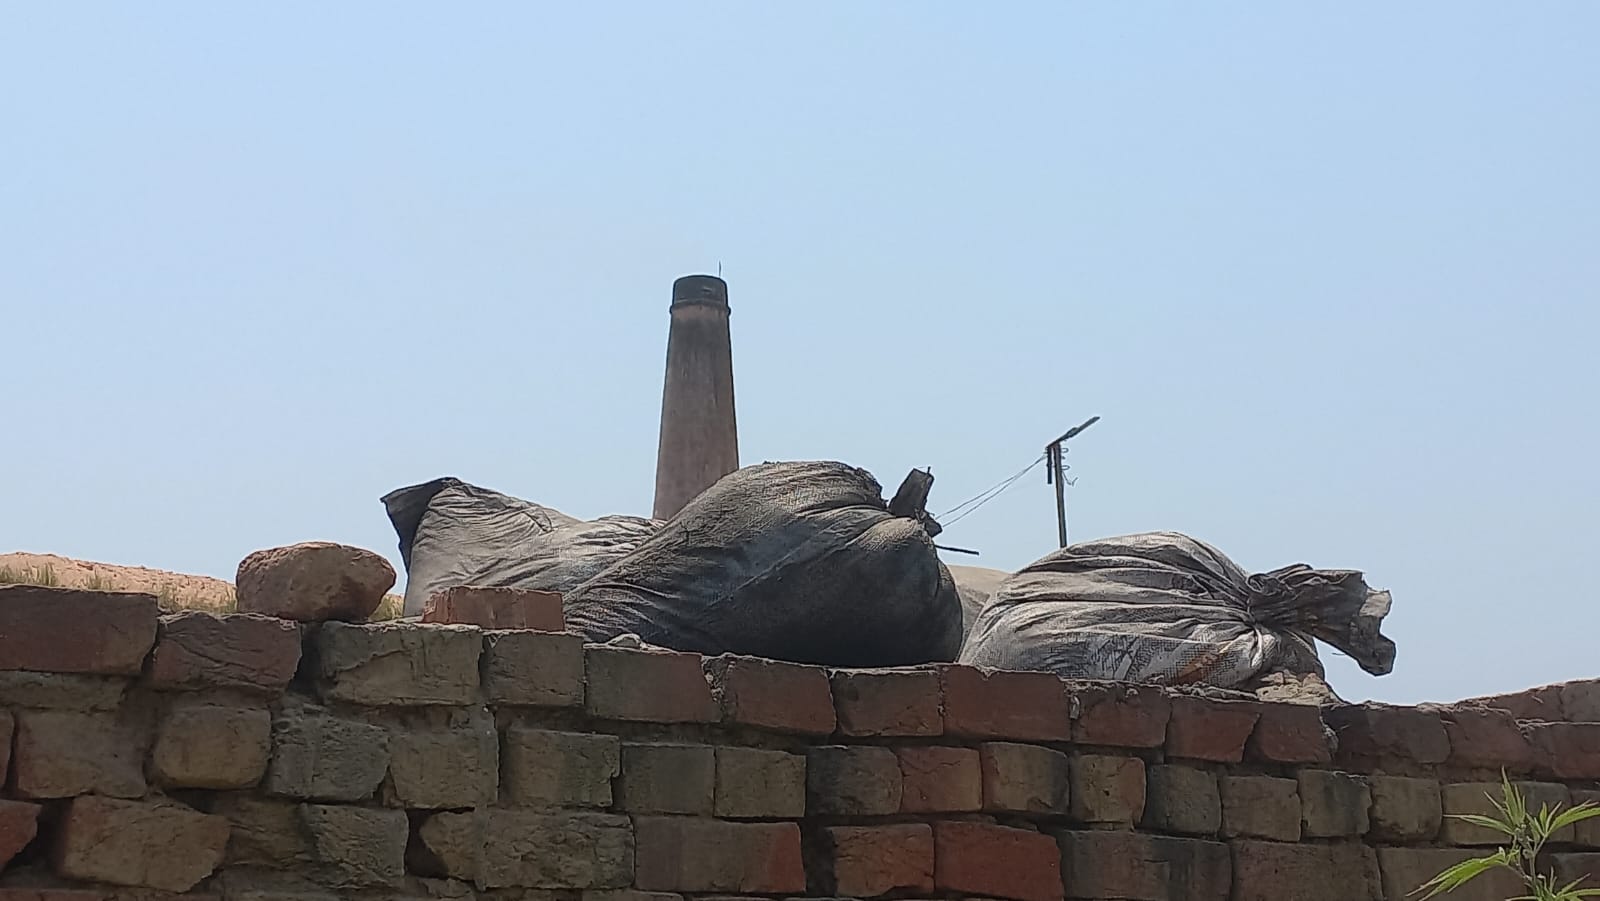 Banned fuel being burnt on brick kilns